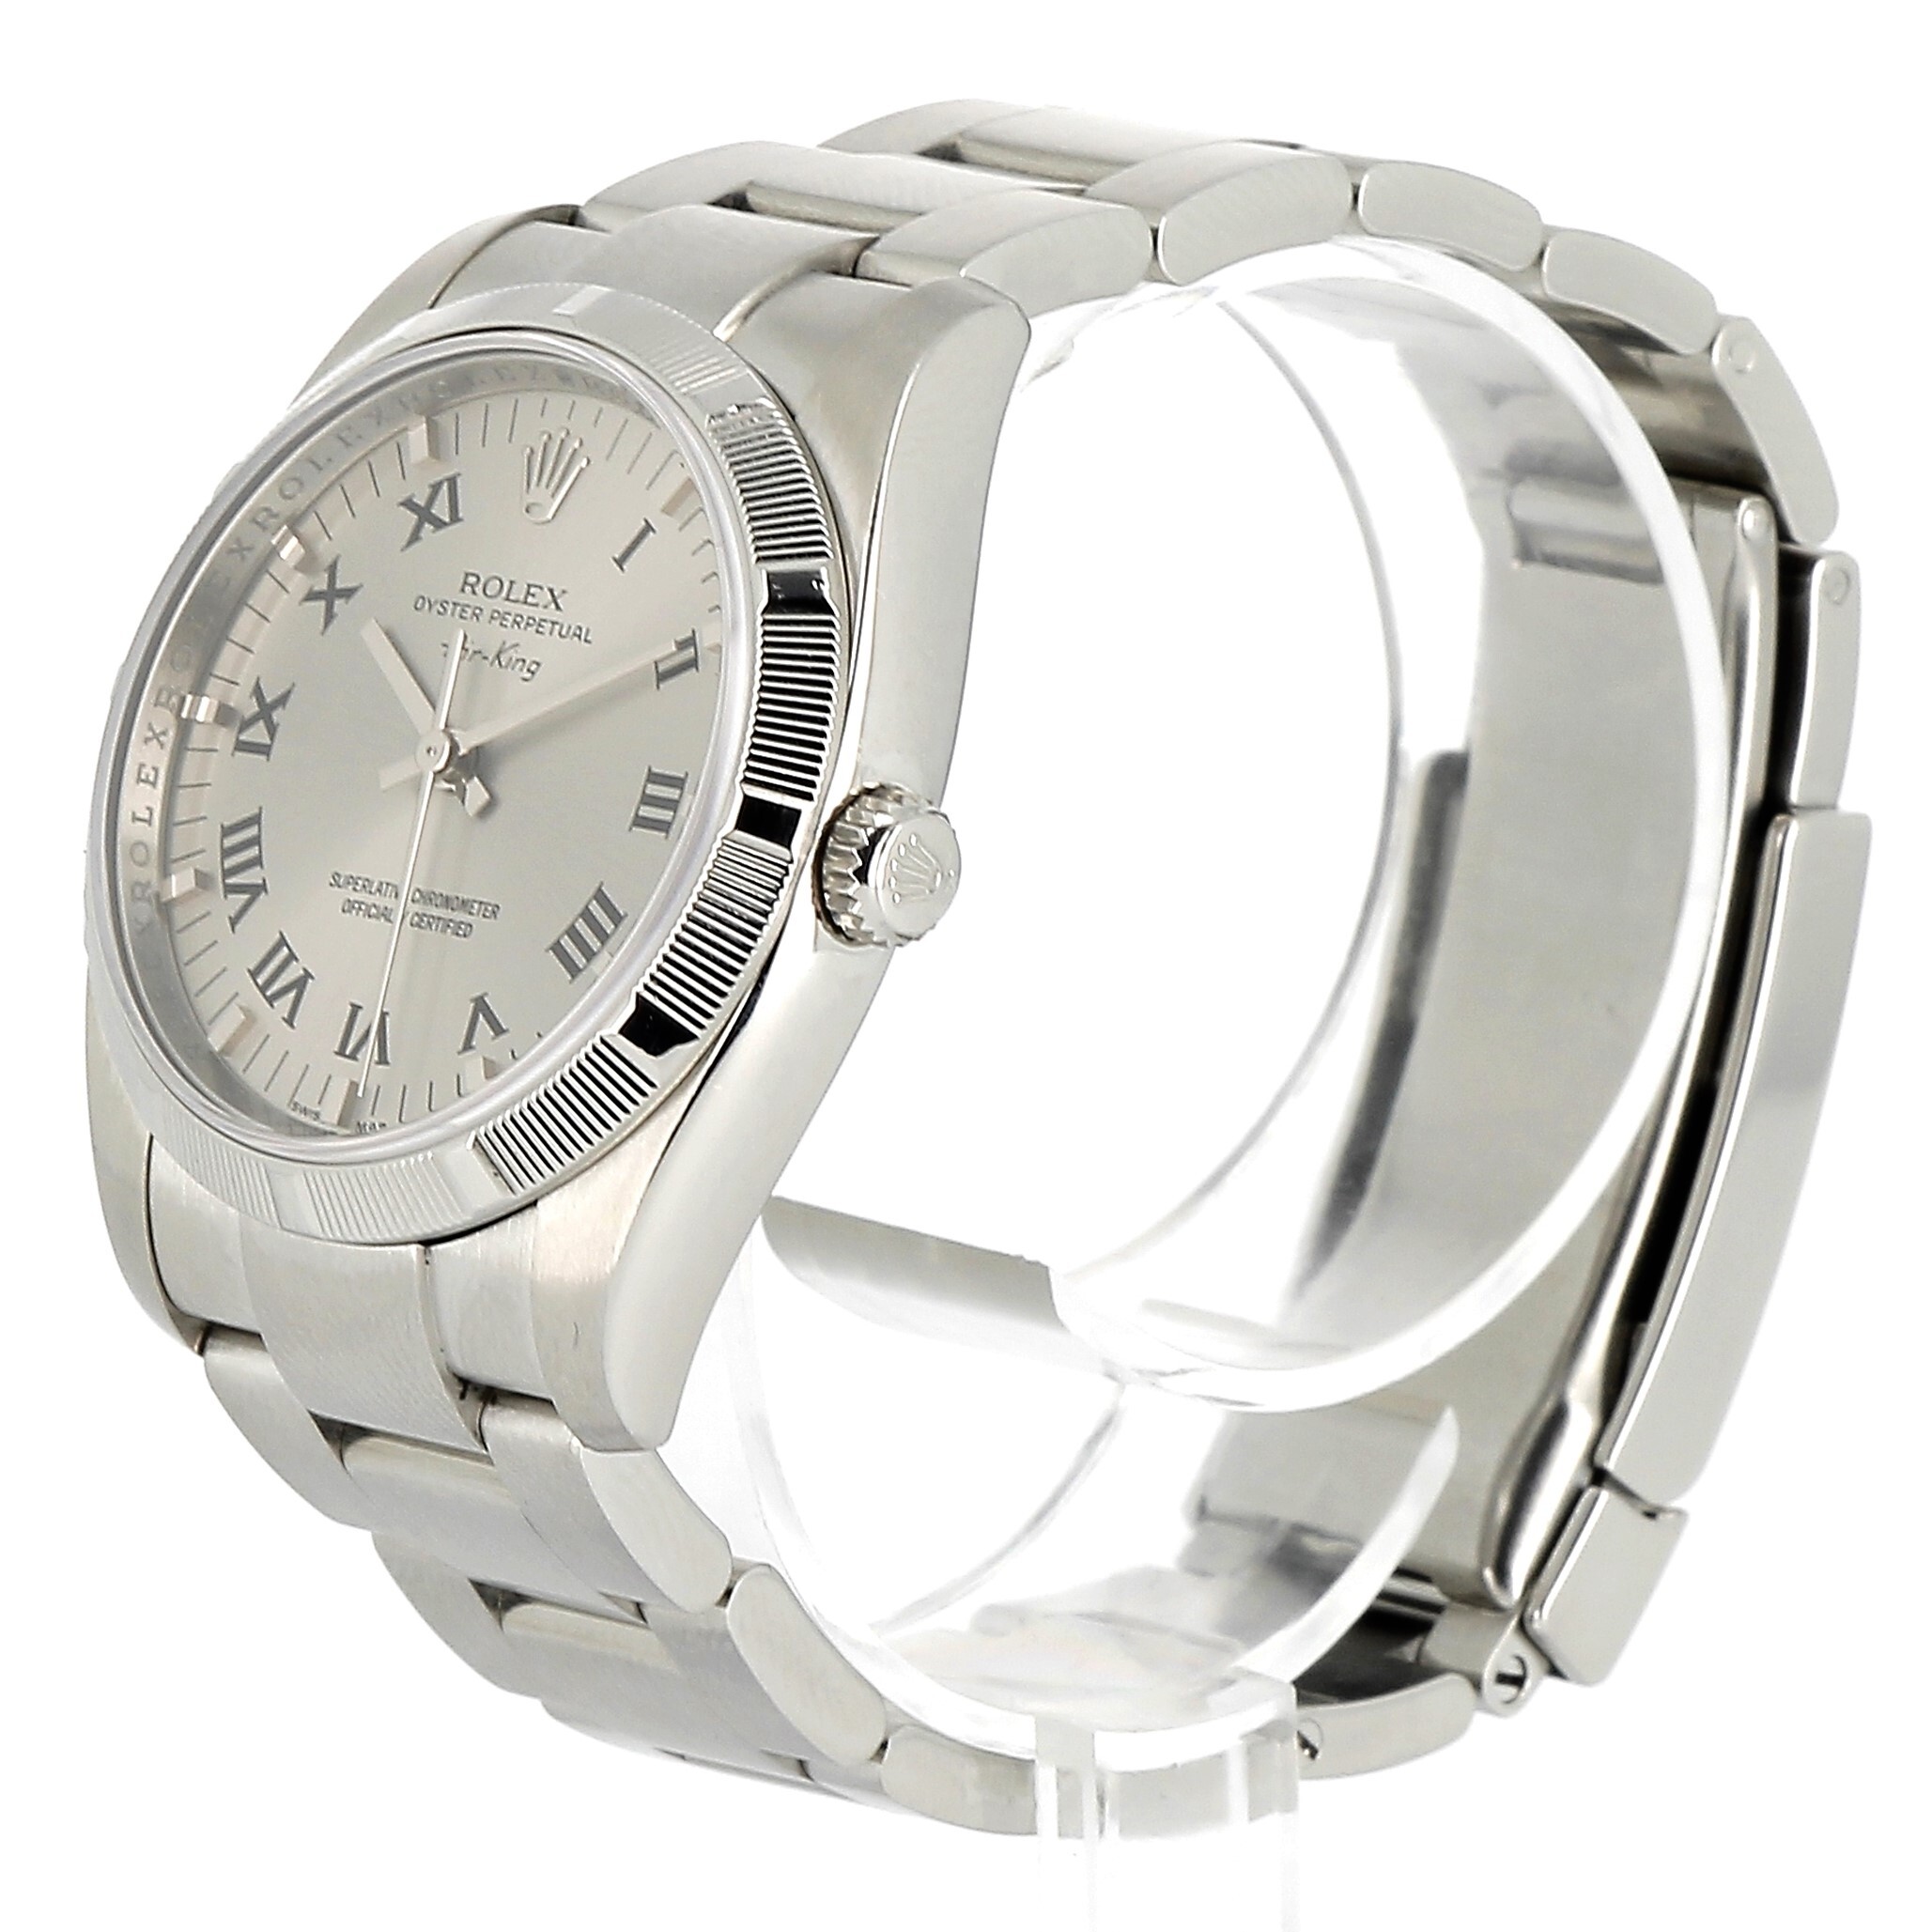 Oyster Perpetual Air-king vue 8